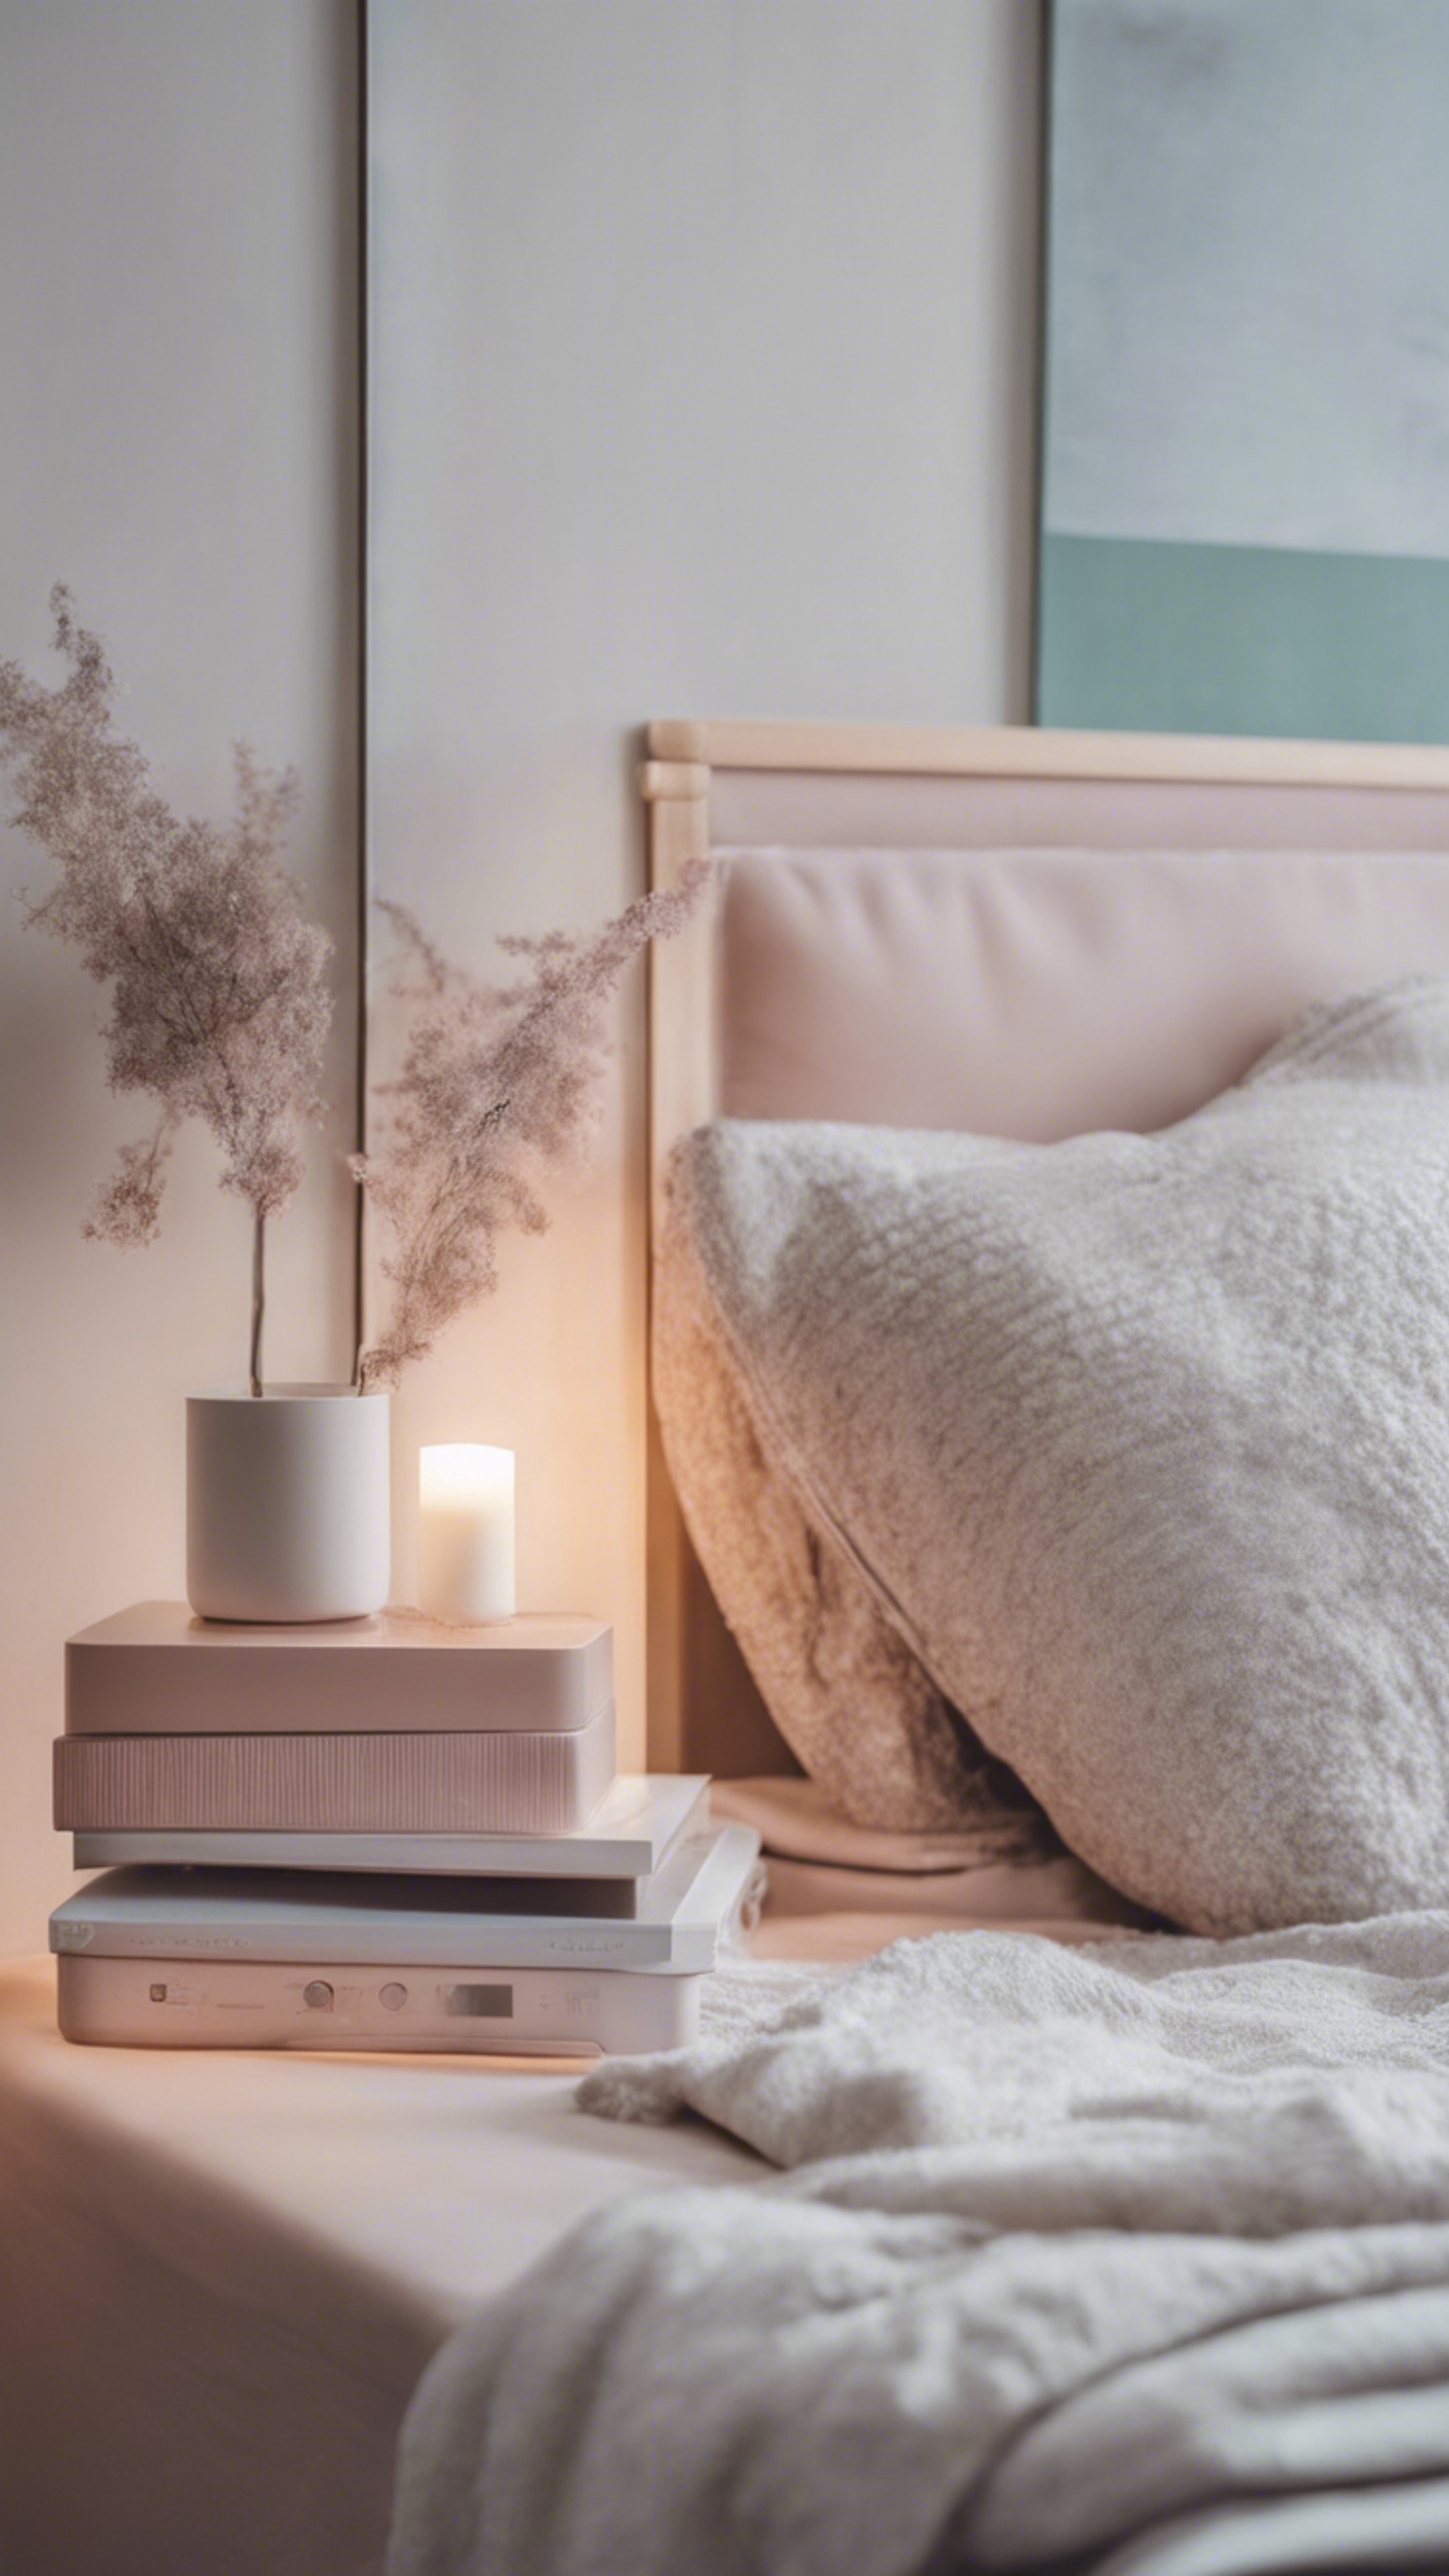 A modern minimalist bedroom in pastel hues with cozy blankets and a stylish bedside table. Wallpaper[e12df14007a0419d89d8]